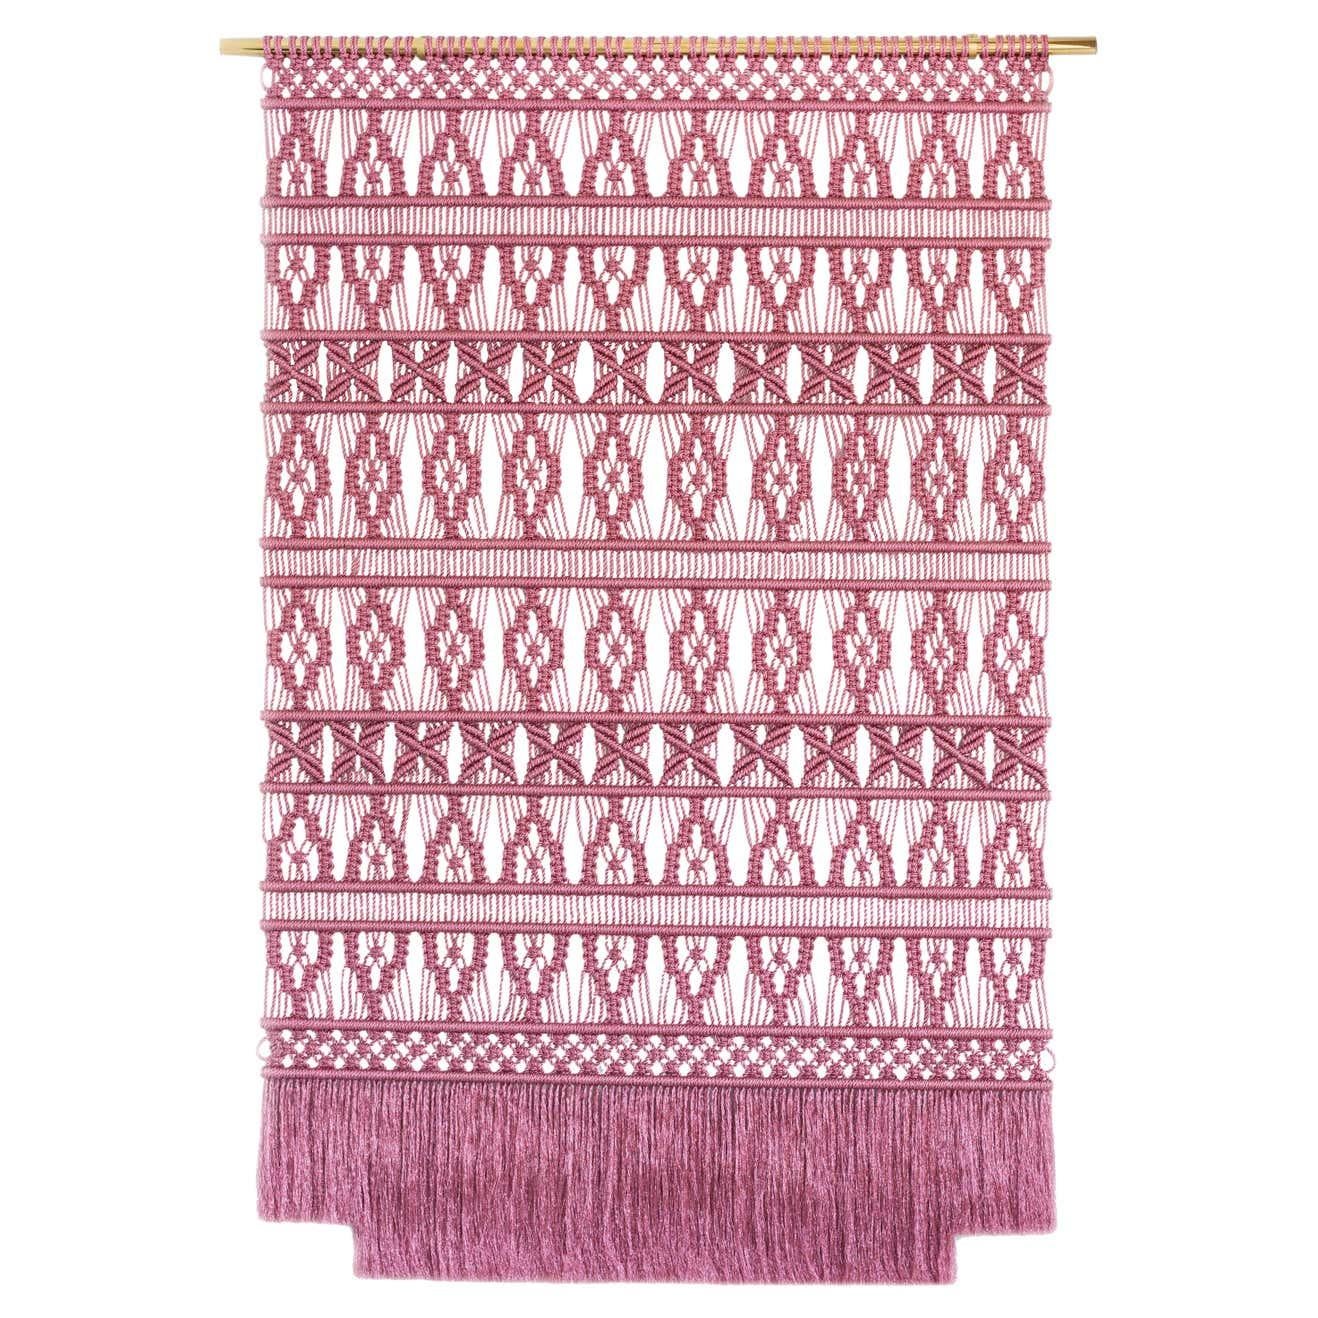 Pink wall hanging rug by Milla Novo
Dimensions: D180 x H285 cm
Materials: Pink metallic rope
Weight: 35 kg

Milla Novo is an artist based in the Netherlands. She creates exclusive wallhangings for high-end interiors. These unique pieces of art